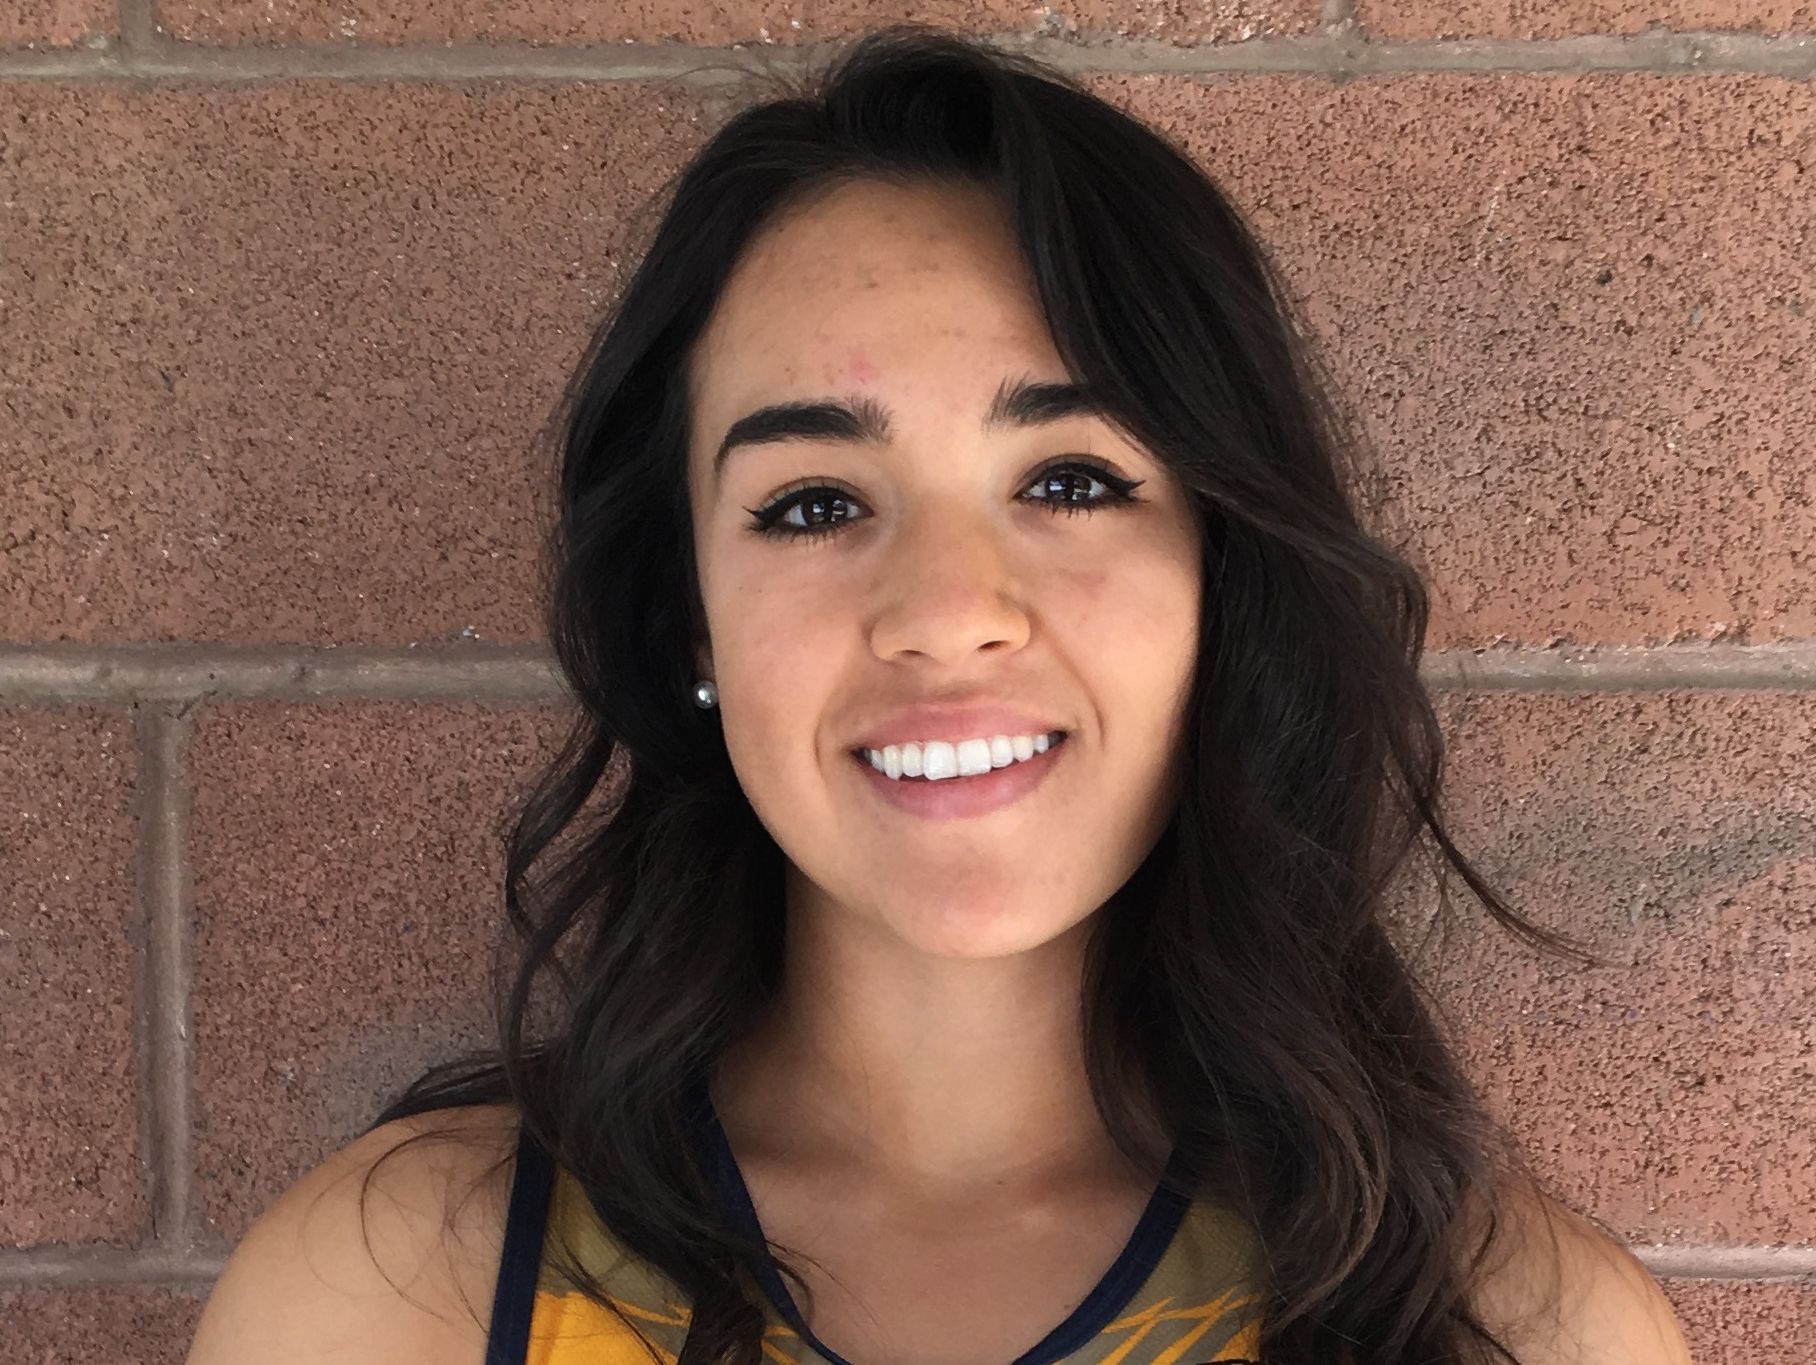 Sierra Rodriguez, from Tucson Flowing Wells, is azcentral sports' Arizona Sports Awards Female Athlete of the Week, presented by La-Z-Boy Furniture Galleries, for March 10-17.